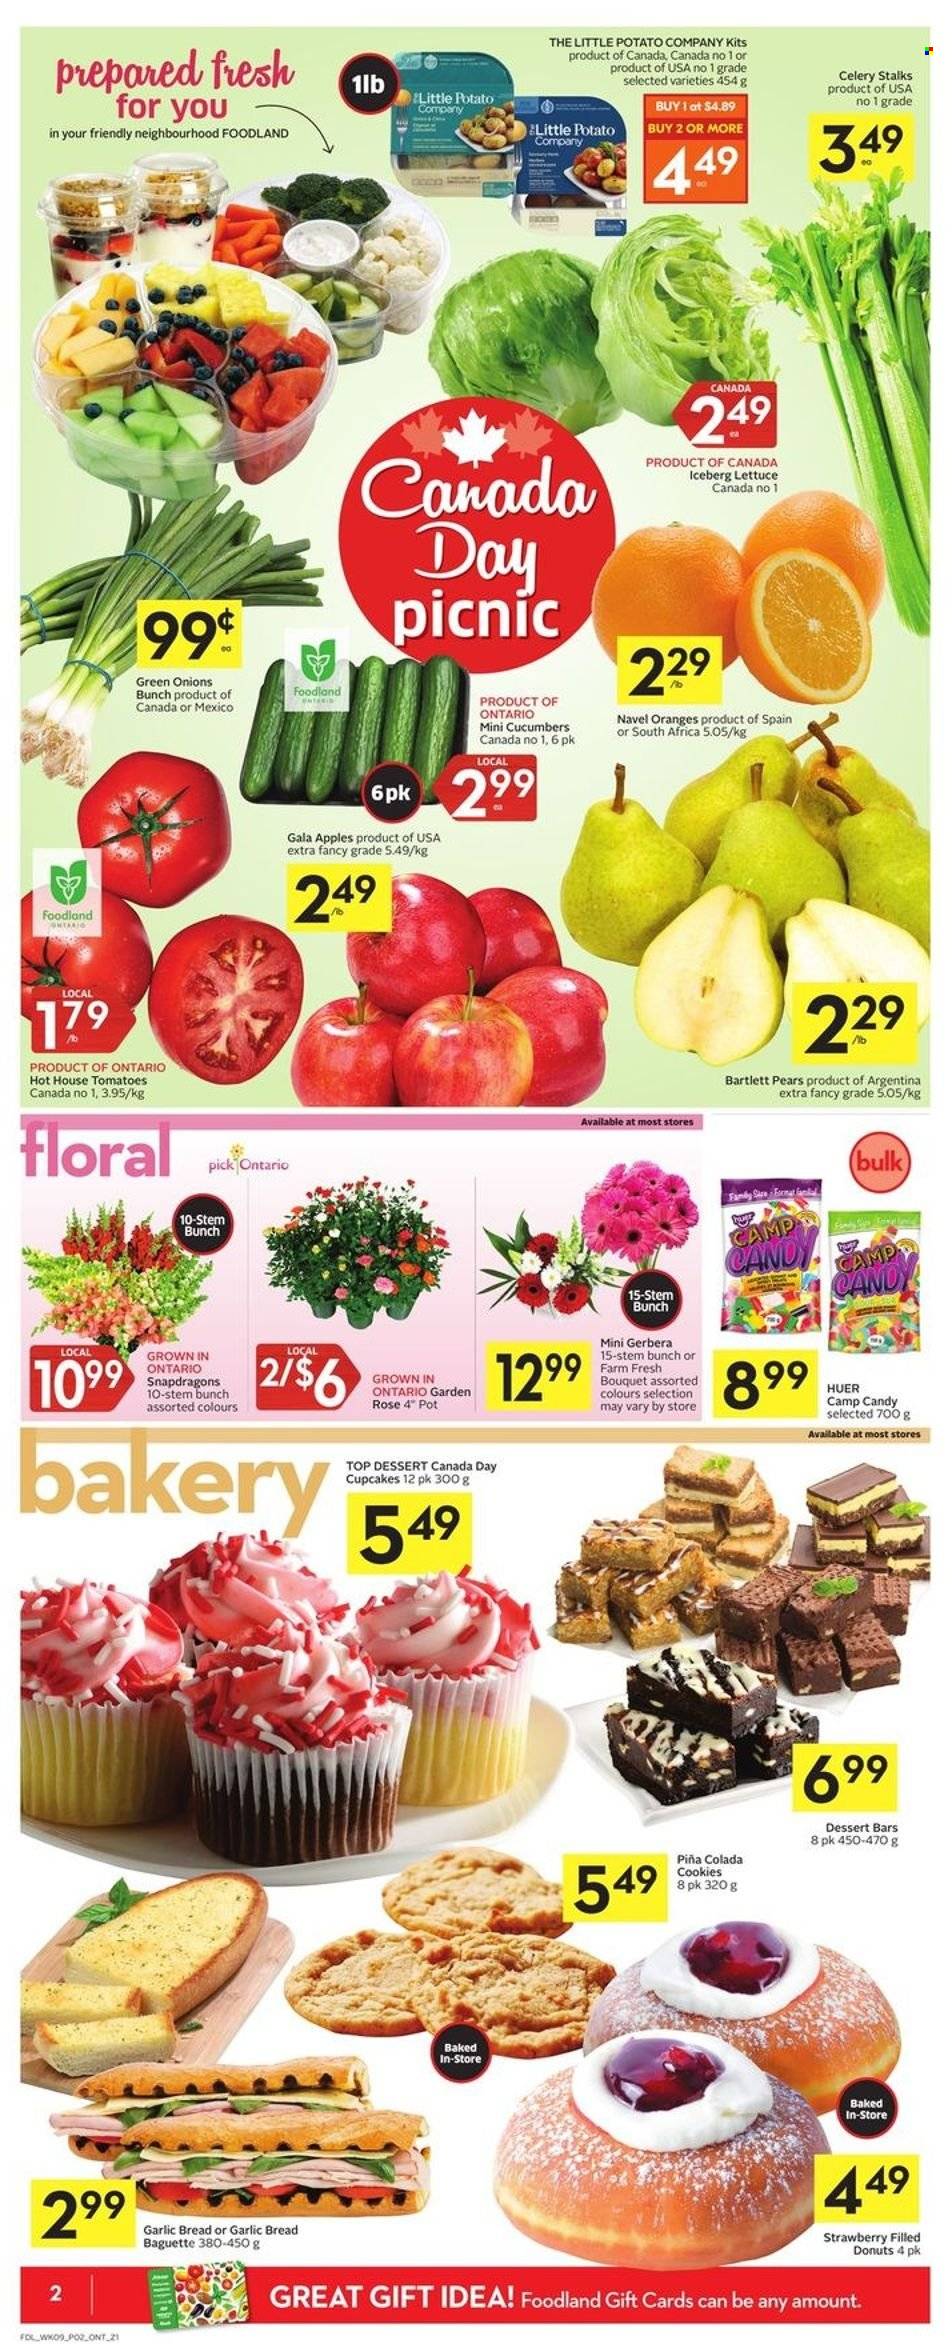 thumbnail - Foodland Flyer - June 30, 2022 - July 06, 2022 - Sales products - bread, cupcake, donut, celery, cucumber, tomatoes, green onion, sleeved celery, apples, Bartlett pears, Gala, pears, navel oranges, cookies, wine, rosé wine, pot, bouquet, gerbera, rose, baguette, oranges. Page 2.